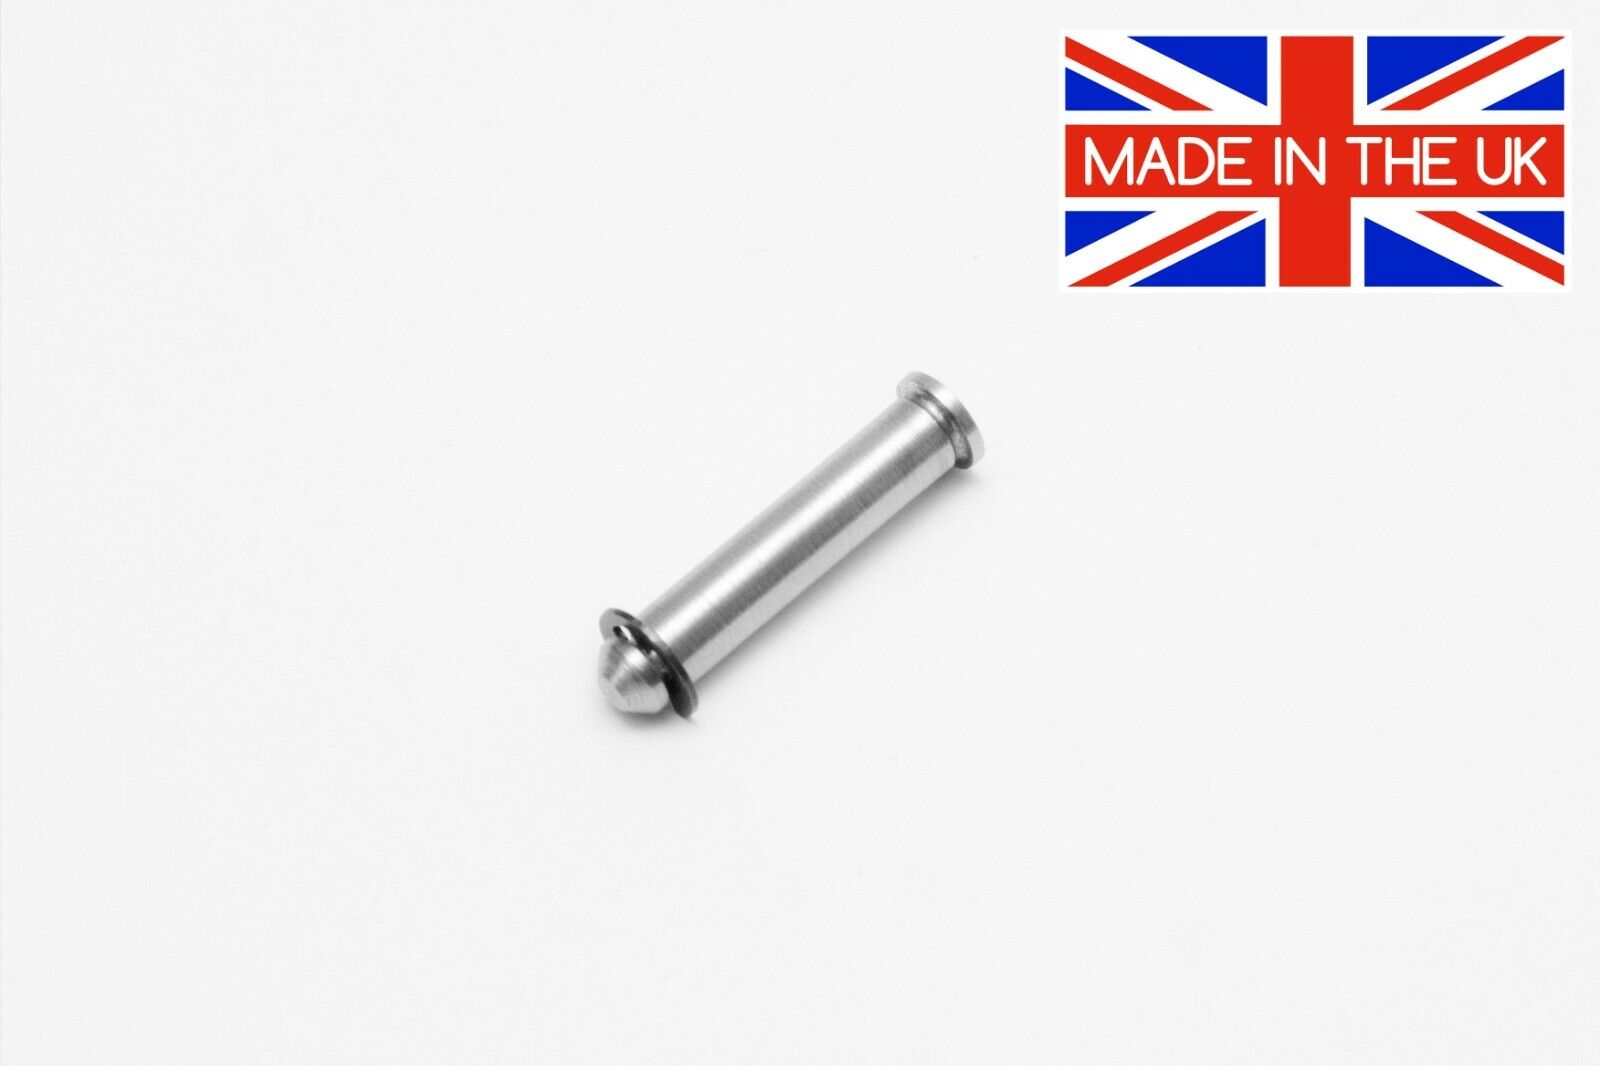 Swing Arm Roll Pin Upgrade for Crosman Series Airguns (Made in Stainless Steel)